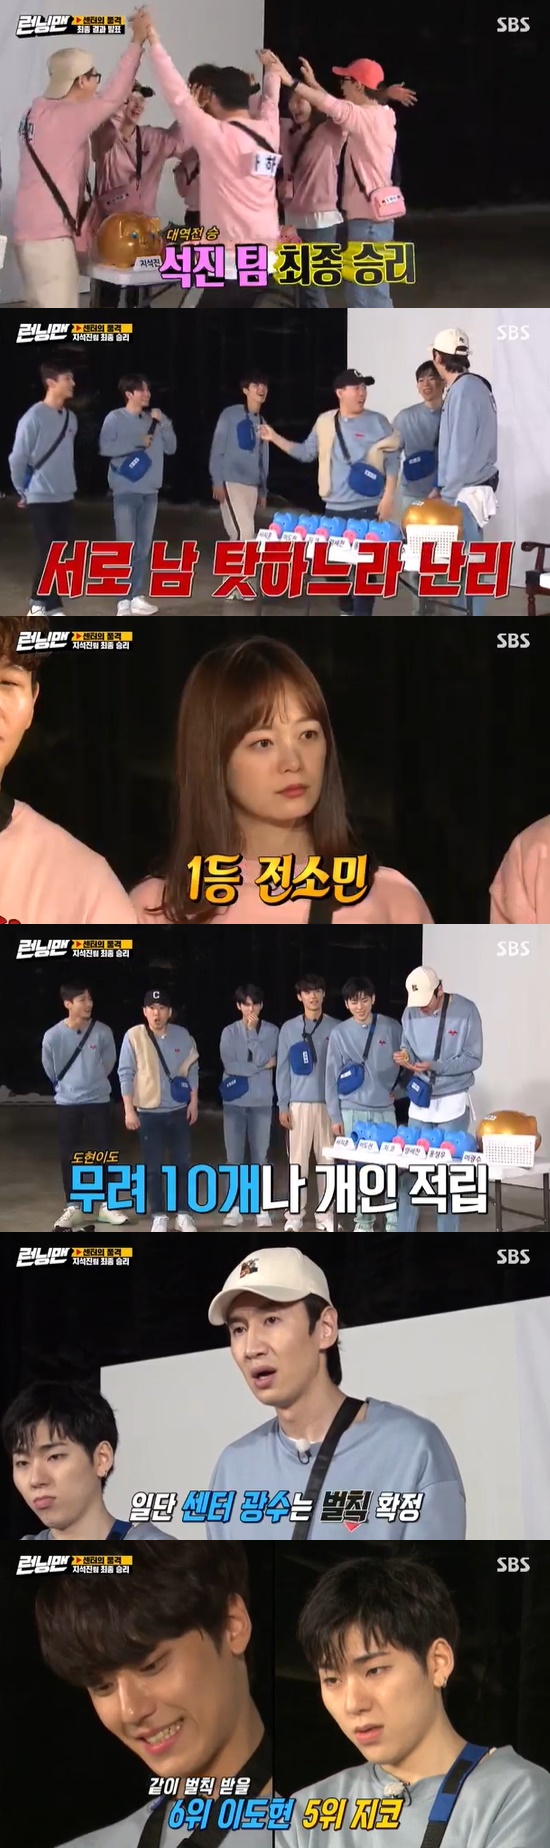 Running Man Kwangsoo team lost to quartz team, Lee Kwang-soo, Lee Do-hyun and Zico were penalized.On SBS Good Sunday - Running Man broadcasted on the 29th, Seo Ji-hoon recently said that he is interested in music of Yoon-dong.On this day, the Kwangsoo team (Lee Kwang-soo, Yang Se-chan, Zico, Lee Do-hyun, Seo Ji-hoon, Ong Sung-woo), Seokjin team (Ji Suk-jin, Yoo Jae-Suk, Song Ji-hyo, Jeon So-min, Kim Jong-kook, Haha) were divided into Center The Dignity of the World race has begun.All members will receive 50 RCOINs, 15 teams that win each mission, and 20 teams that win each team must collect and submit 20 COINs.First, the Kwangsoo team, which won the egg double-decker game, had to submit 15 COINs and 20 COINs for the quartz team.The Kwangsoo team promised to make three, but Zico, who came out with COIN, looked at Yang Se-chan and said, Its a big hit. How already?The last one went to get COIN. 3COIN was scarce. Kwangsoo said he would find a traitor without COIN.Theres a dirty loach in here, Lee Kwang-soo said, pointing to Yang Se-chan as a traitor.But Yang Se-chan was not a traitor, and the wrong Kwangsoo spent five more.Yoo Jae-Suk sent out Jeon So-min, saying, We go from loach.Jeon So-min said it was unconditional, but next runner, Yoo Jae-Suk, looked at Jeon So-min and said, How do you do this from the beginning?Last runner Ji Suk-jin saw only six of them in the situation of 20 Sei Ashina and laughed, How is it, three bets hard?Ji Suk-jin pointed to Yoo Jae-Suk, but failed to arrest; Song Ji-hyo was the one who gave the least COIN.The second mission was to write any ranking and to rank the pre-survey. The first survey was someone who seemed to be popular as a child.Lee Do-hyun hesitated, Can I be proud? On Valentines Day in elementary school, chocolate was piled up on my desk and my mother came and took it with me.Lee Do-hyun said, When I was a high school student, I played basketball and received a drink.I entered junior high school and stood in line for about three days, said Seo Ji-hoon, while Yoo Jae-Suk and Kim Jong-kook, this is what really happens.I was not a popular student, but when I was on stage at a retreat, I became more popular. I did TVXQ Rising Sun, Zico said.The match was won by the Kwangsoo team, and the Kwangsoo team had 15 COINs for Sei Ashina; however, Lees confirmation showed that there was only one COIN.Lee Kwang-soo laughed with anger, What team is this? Zico said, I know how much my brother paid.I only paid as much as I did, he said, making Kwangsoo more angry.Lee Do-hyun said: It was wrongly inserted from the first button.I had to do it because I put the first button in the wrong way. Ong Sung-woo said, It is the first person who did not follow the first button that was wrongly inserted. Lee Kwang-soo told Lee Do-hyun that he was innocent, Tell me how many you have made, and Lee Do-hyun said he had two in his whispers.Lee Kwang-soo immediately identified Lee Do-hyun as a traitor, and succeeded in arresting him; Lee Do-hyun submitted a deficient RCOIN.Ji Suk-jin also succeeded in arresting traitor Haha.The final mission was believed piggy bank, and believing in the team was key: Ji Suk-jin in the centers room, Lee Kwang-soo, had a quiz showdown.The first issue was the birthday of Yoo Jae-Suk son; Ji Suk-jin laughed when he said, What kind of stone are we?Ji Suk-jin got the right answer with the help of Haha, and took one COIN from Kwangsoo.Zico approached Yoo Jae-Suk thinking he was alone, but was surprised to have Kim Jong-kook.Zico then saw Song Ji-hyo alone and said, One-on-one is a winner, but Kim Jong-kook also came out.Zico ripped another name tag off Kim Jong-kook, who continued to laugh when Zicos name tag was delivered, saying, Just stay still.Yang Se-chan went to Lee Kwang-soo with Ong Sung-woo, Zico, Lee Do-hyun and Seo Ji-hoon who had never received COIN from Kwangsoo.Yang Se-chan acted as a group to ask for COIN, and eventually Kwangsoo paid COIN after closing his eyes to his team members; Lee Kwang-soo distributed everything.Im broke, but COIN came out of my back pocket.Lee Kwang-soo quickly said, I tested you and it passed. He gave more COIN to Ong Sung Woo, who submitted one COIN.But then Zico also lied, I had COIN earlier, and Kwangsoo sent out Zico.As a result, the team members of the Kwangsoo team won the Seokjin team because they put it in their own piggy bank, not the center.The final first was Jeon So-min, the second was Yoo Jae-Suk, Kim Jong-kook, and the Kwangsoo team individual piggy bank opening time.The last place was center Kwangsoo. And Lee Do-hyun and Zico were punished together.Photo = SBS Broadcasting Screen